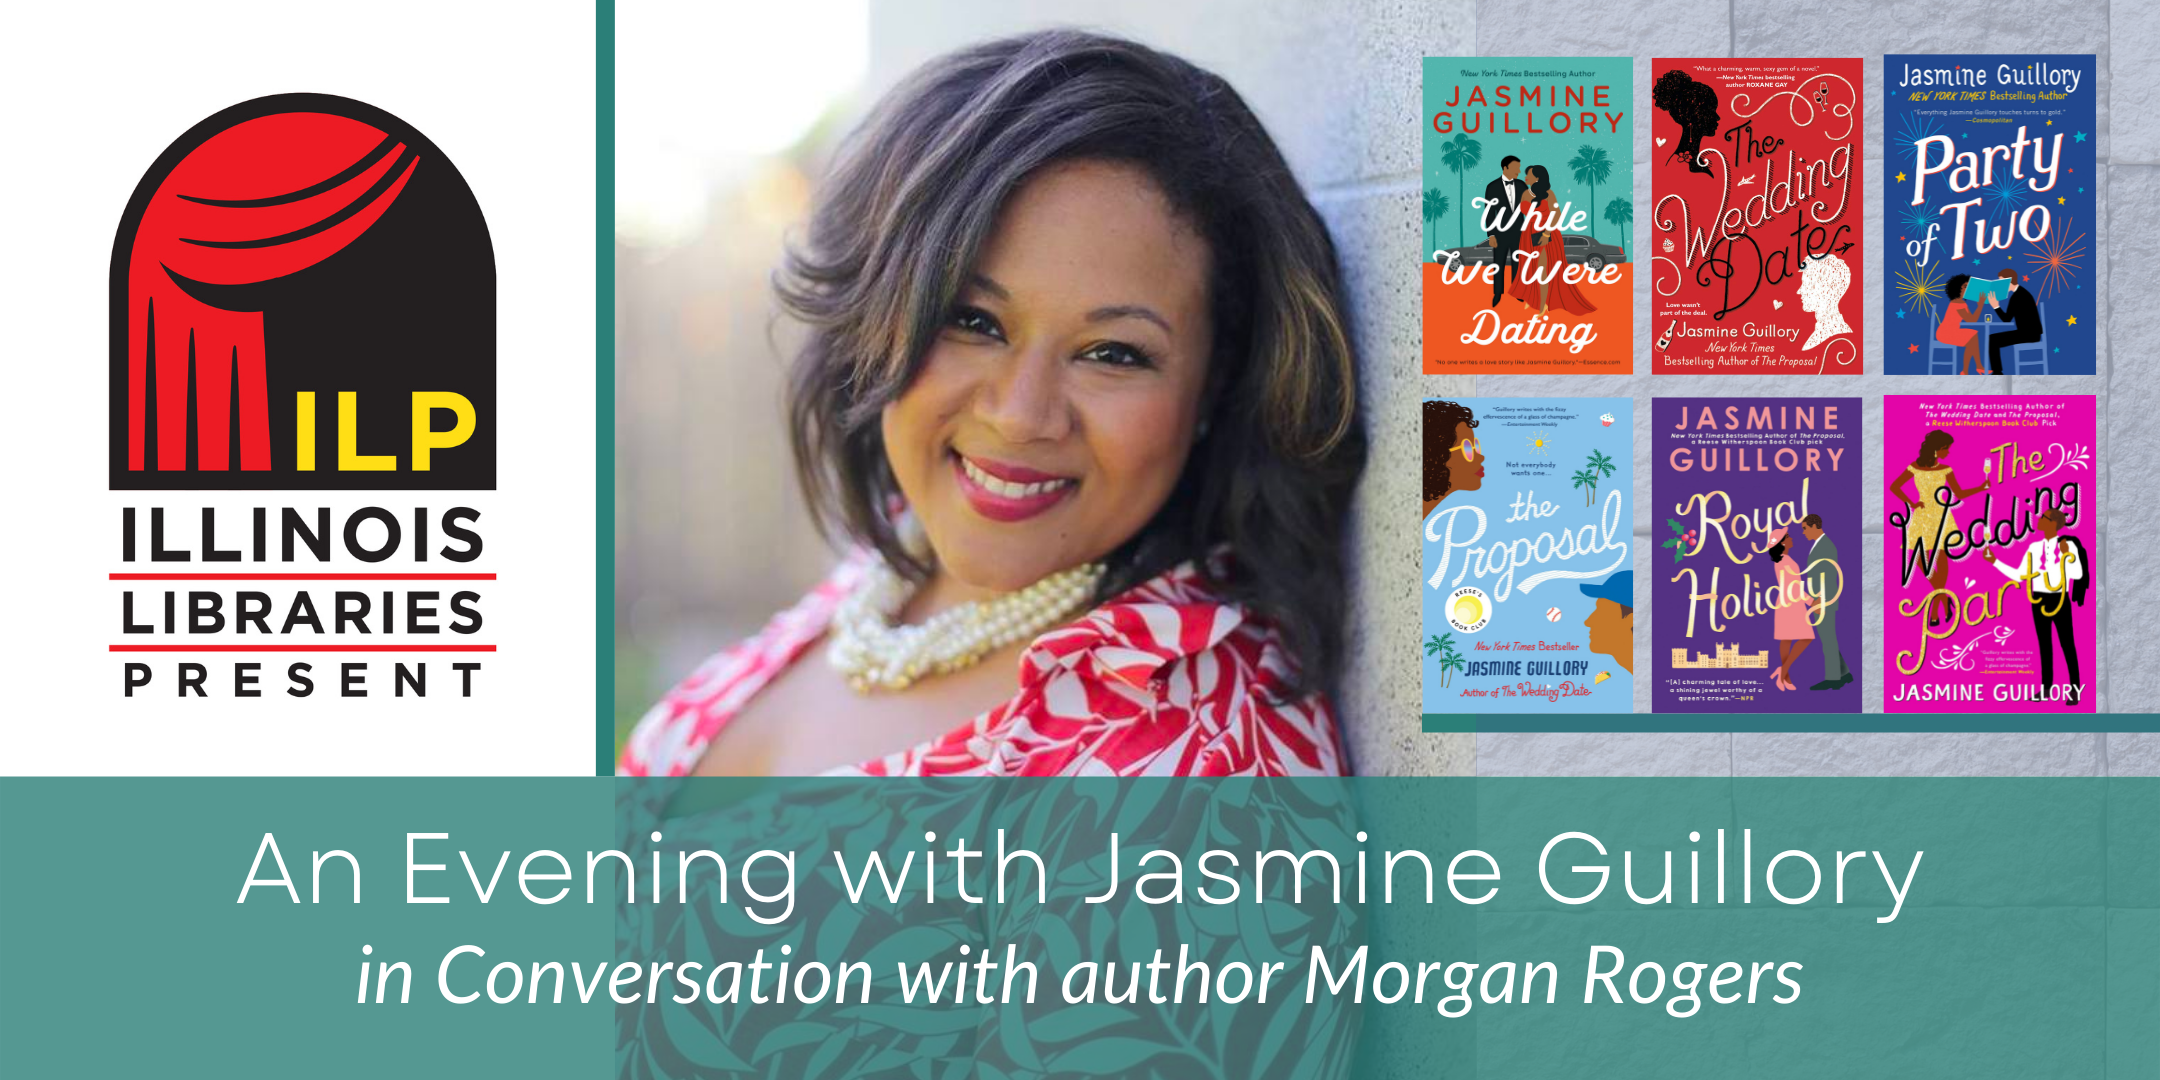 Illinois Libraries Present: An Evening with Jasmine Guillory event image with author and book covers